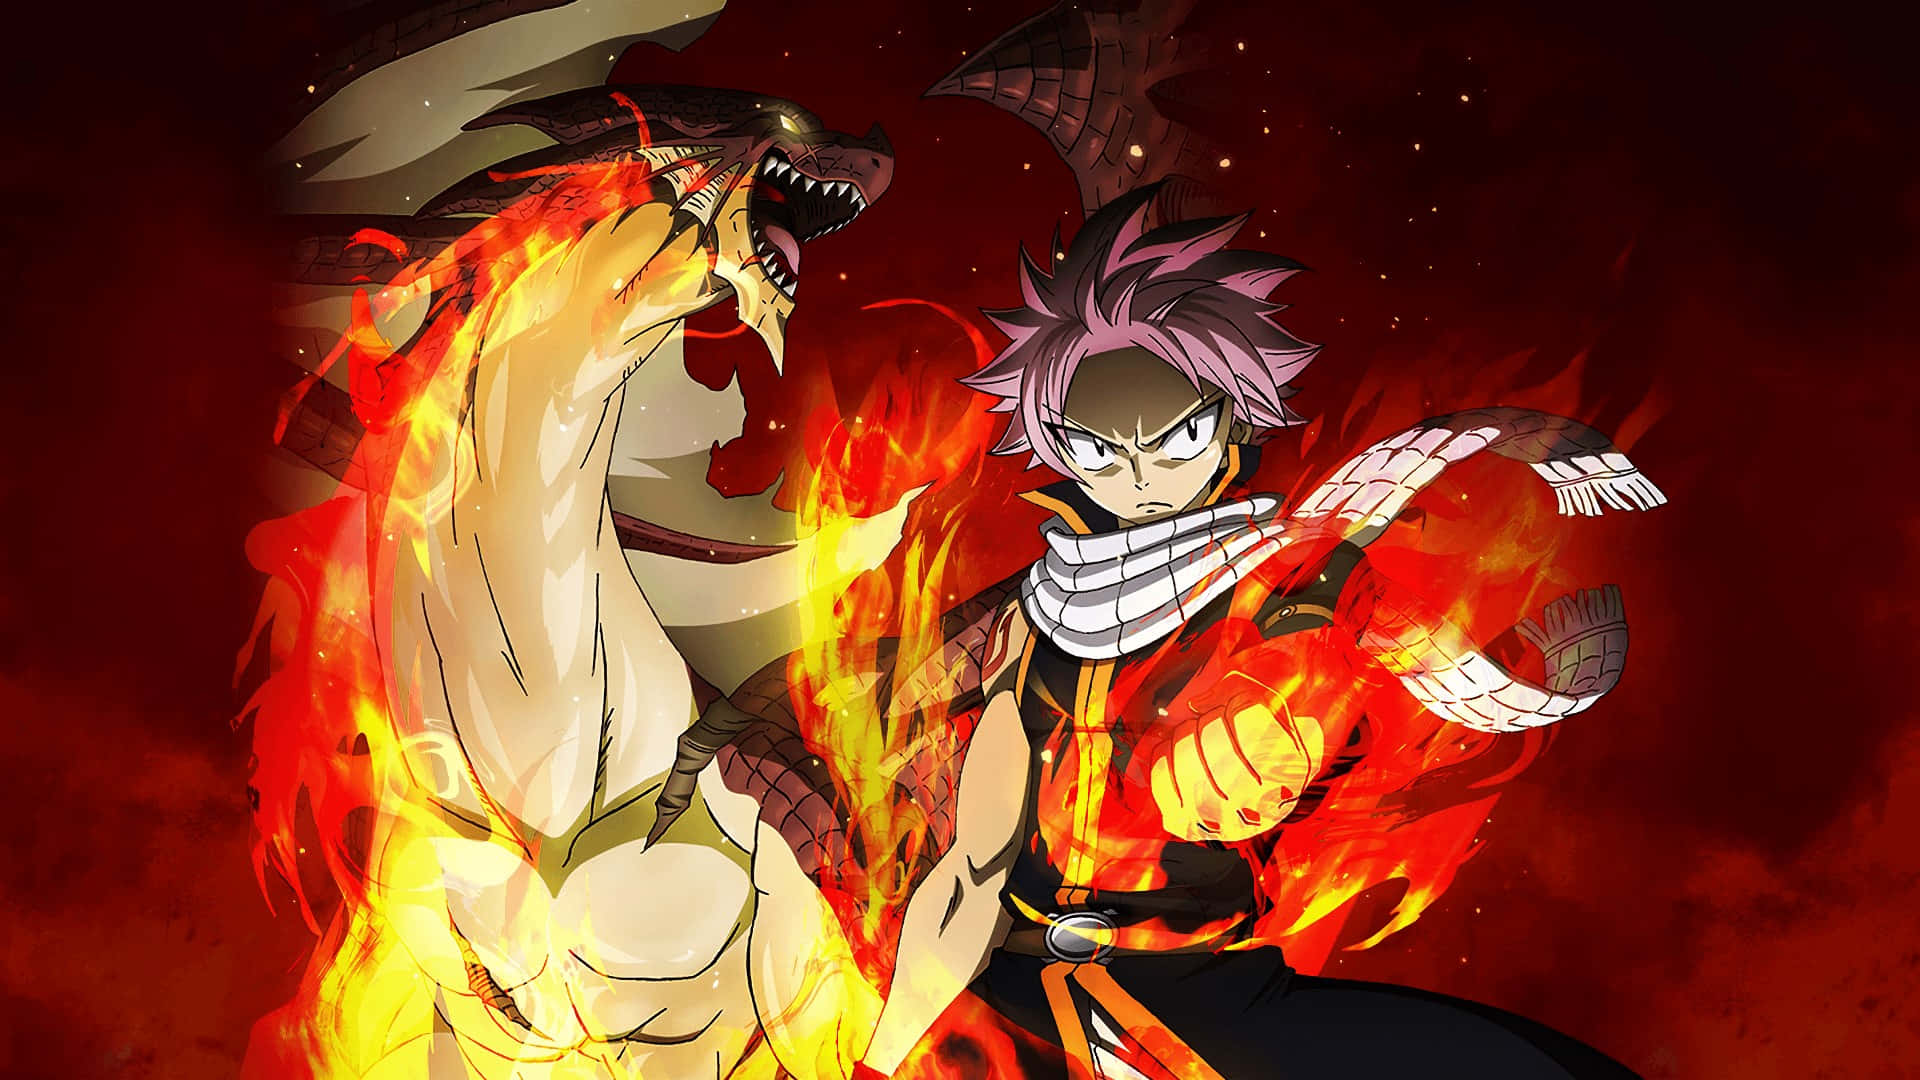 Natsu Dragneel - Fiery Fairy Tail Mage Background